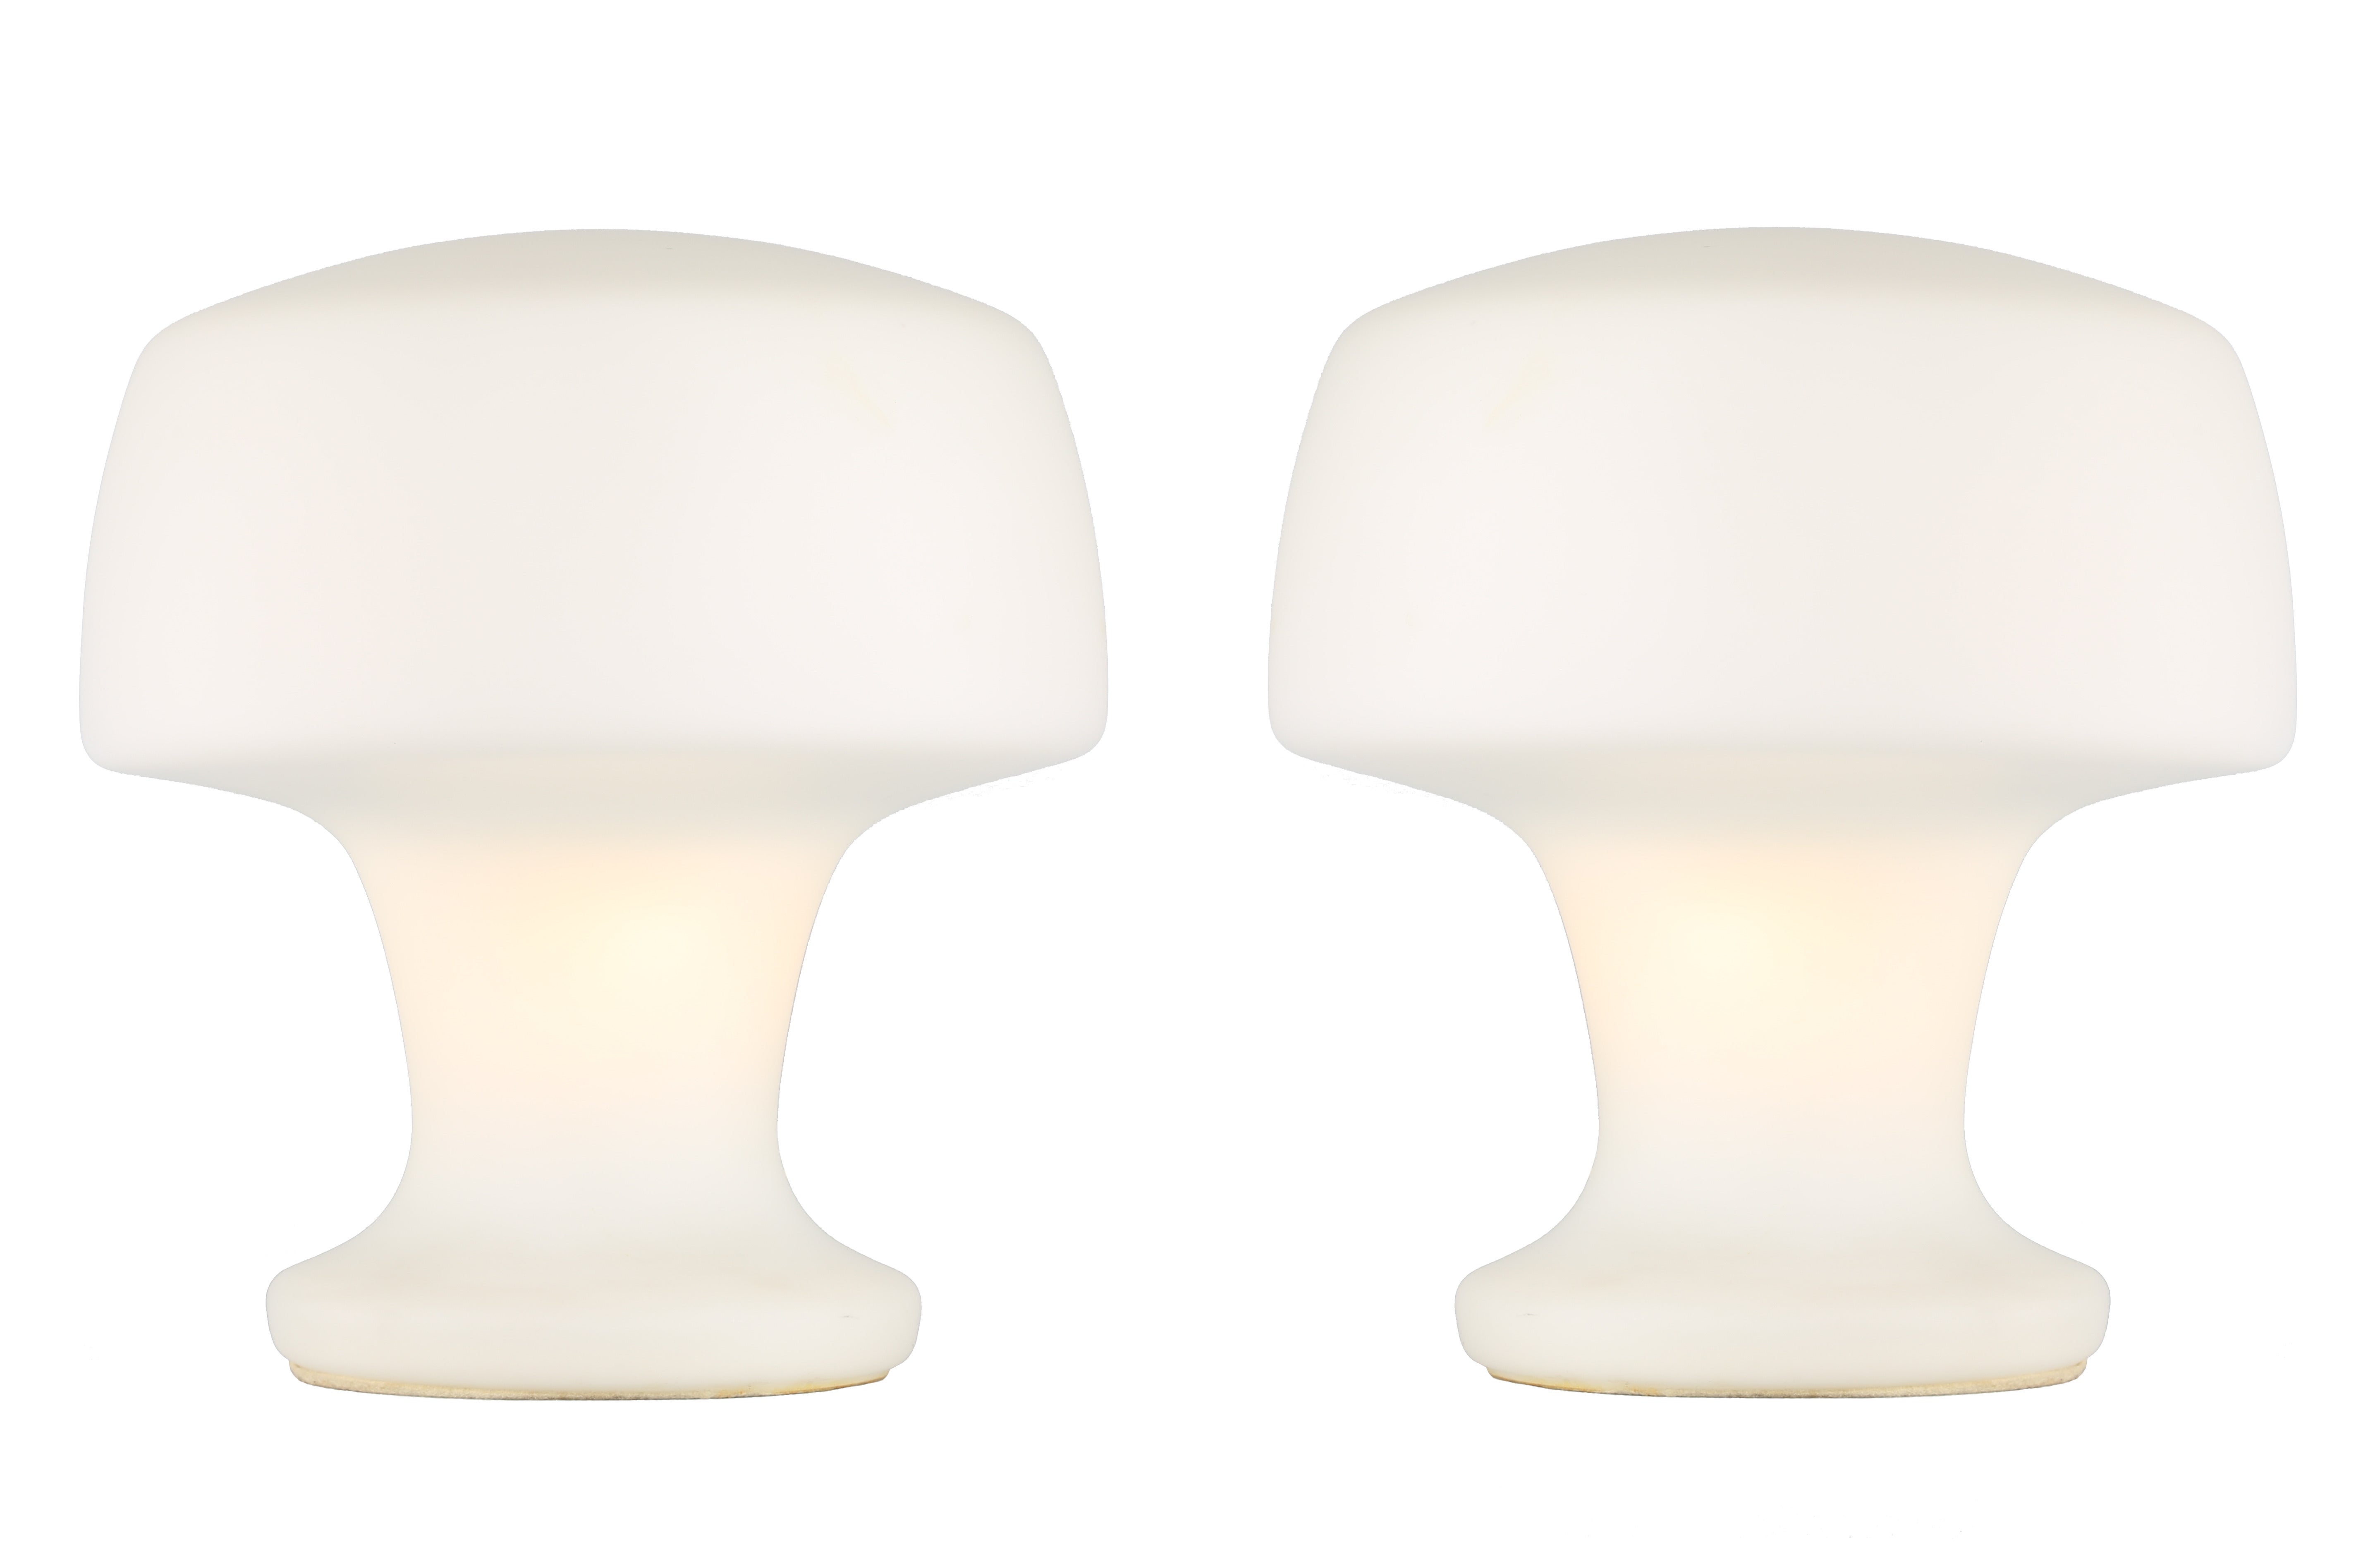 Pair of Mushroom-Shaped, Frosted-Glass Table Lamps by Laurel, Circa 1960s